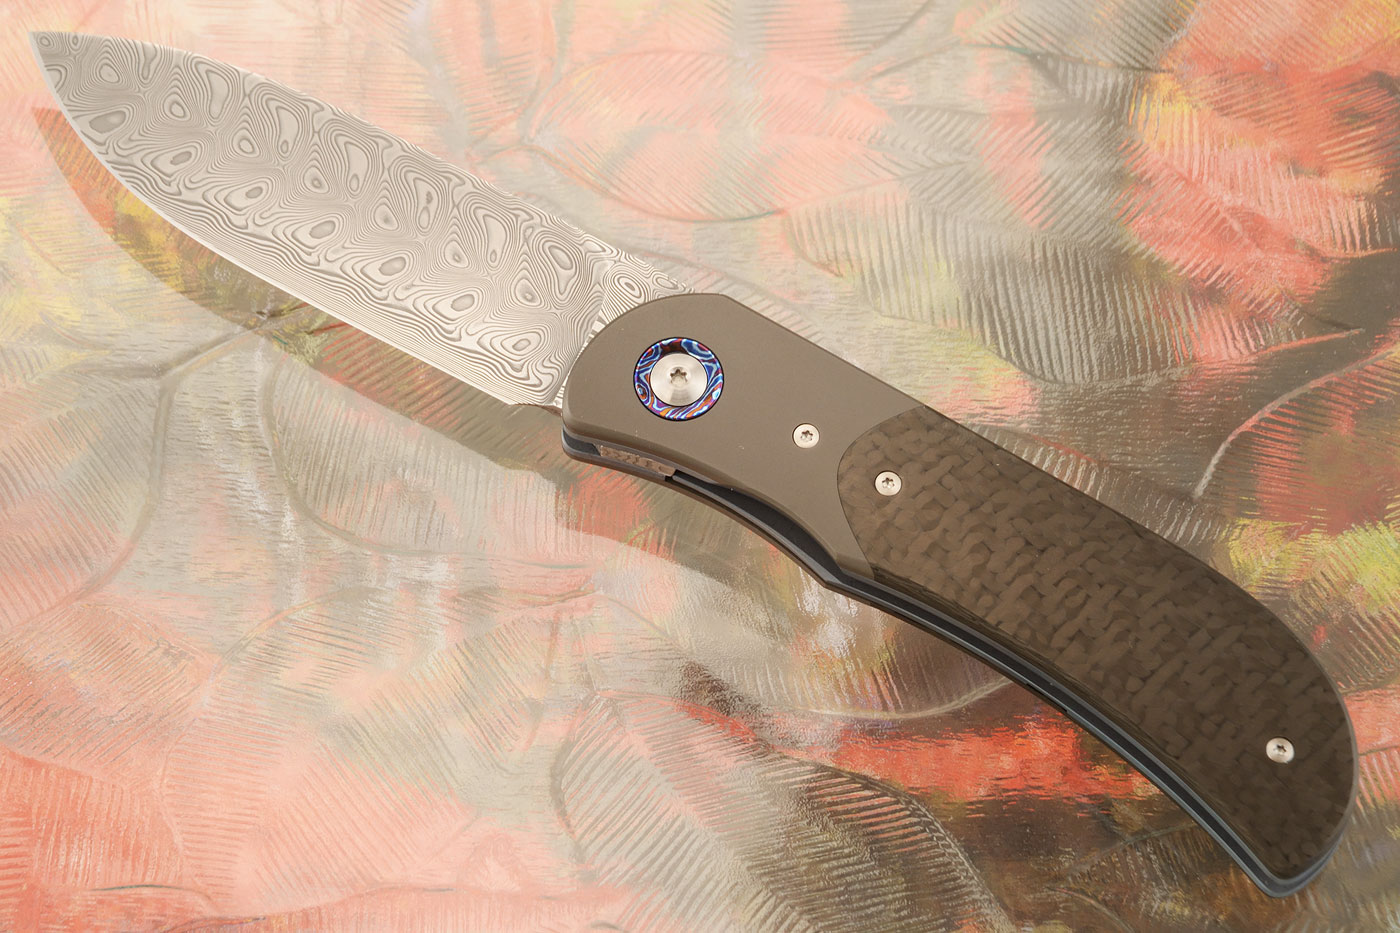 LEXK Plus Front Flipper with Carbon Fiber and Timascus - Damasteel